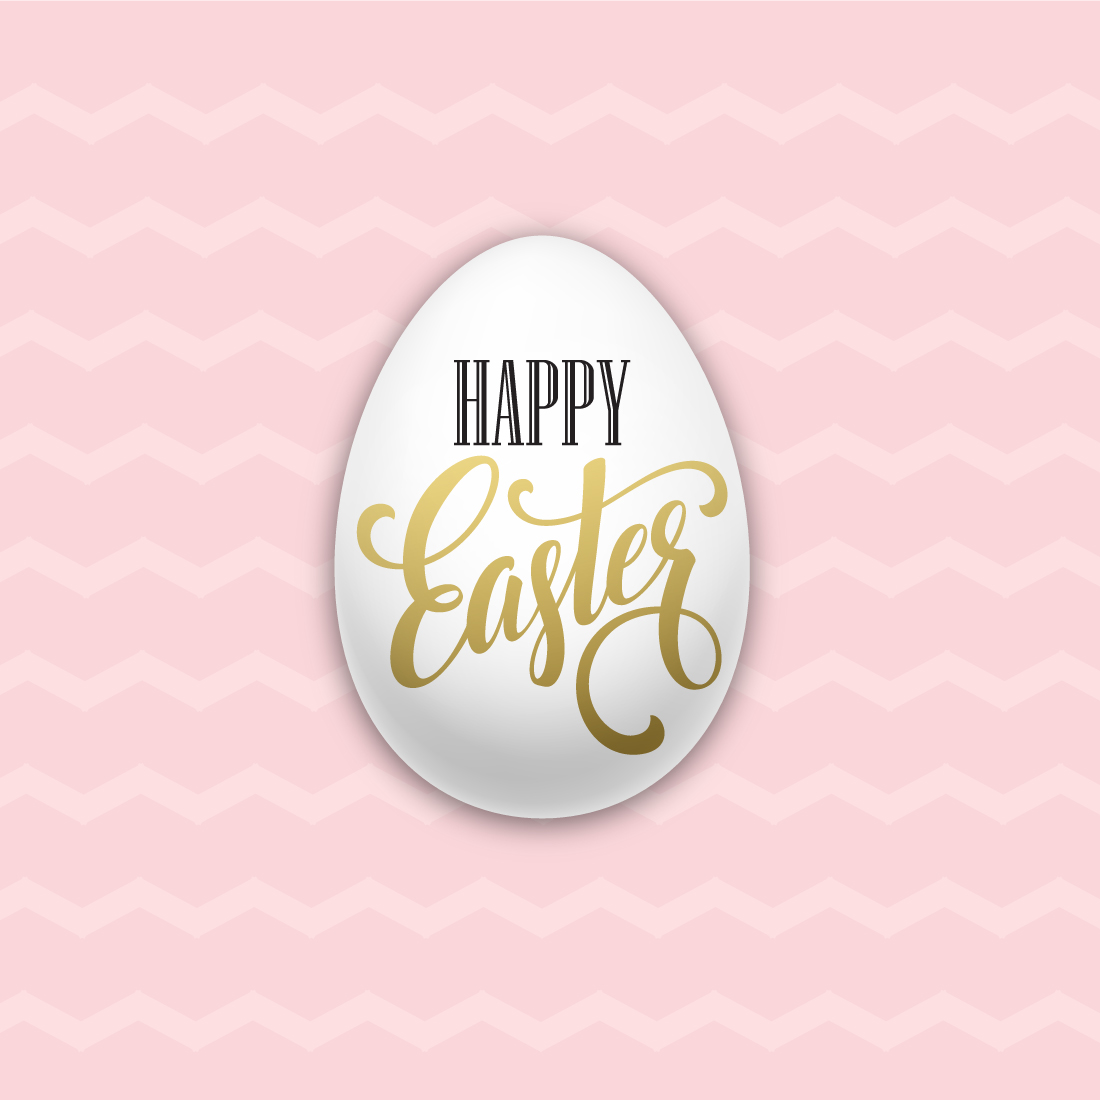 Happy easter egg on a pink background.